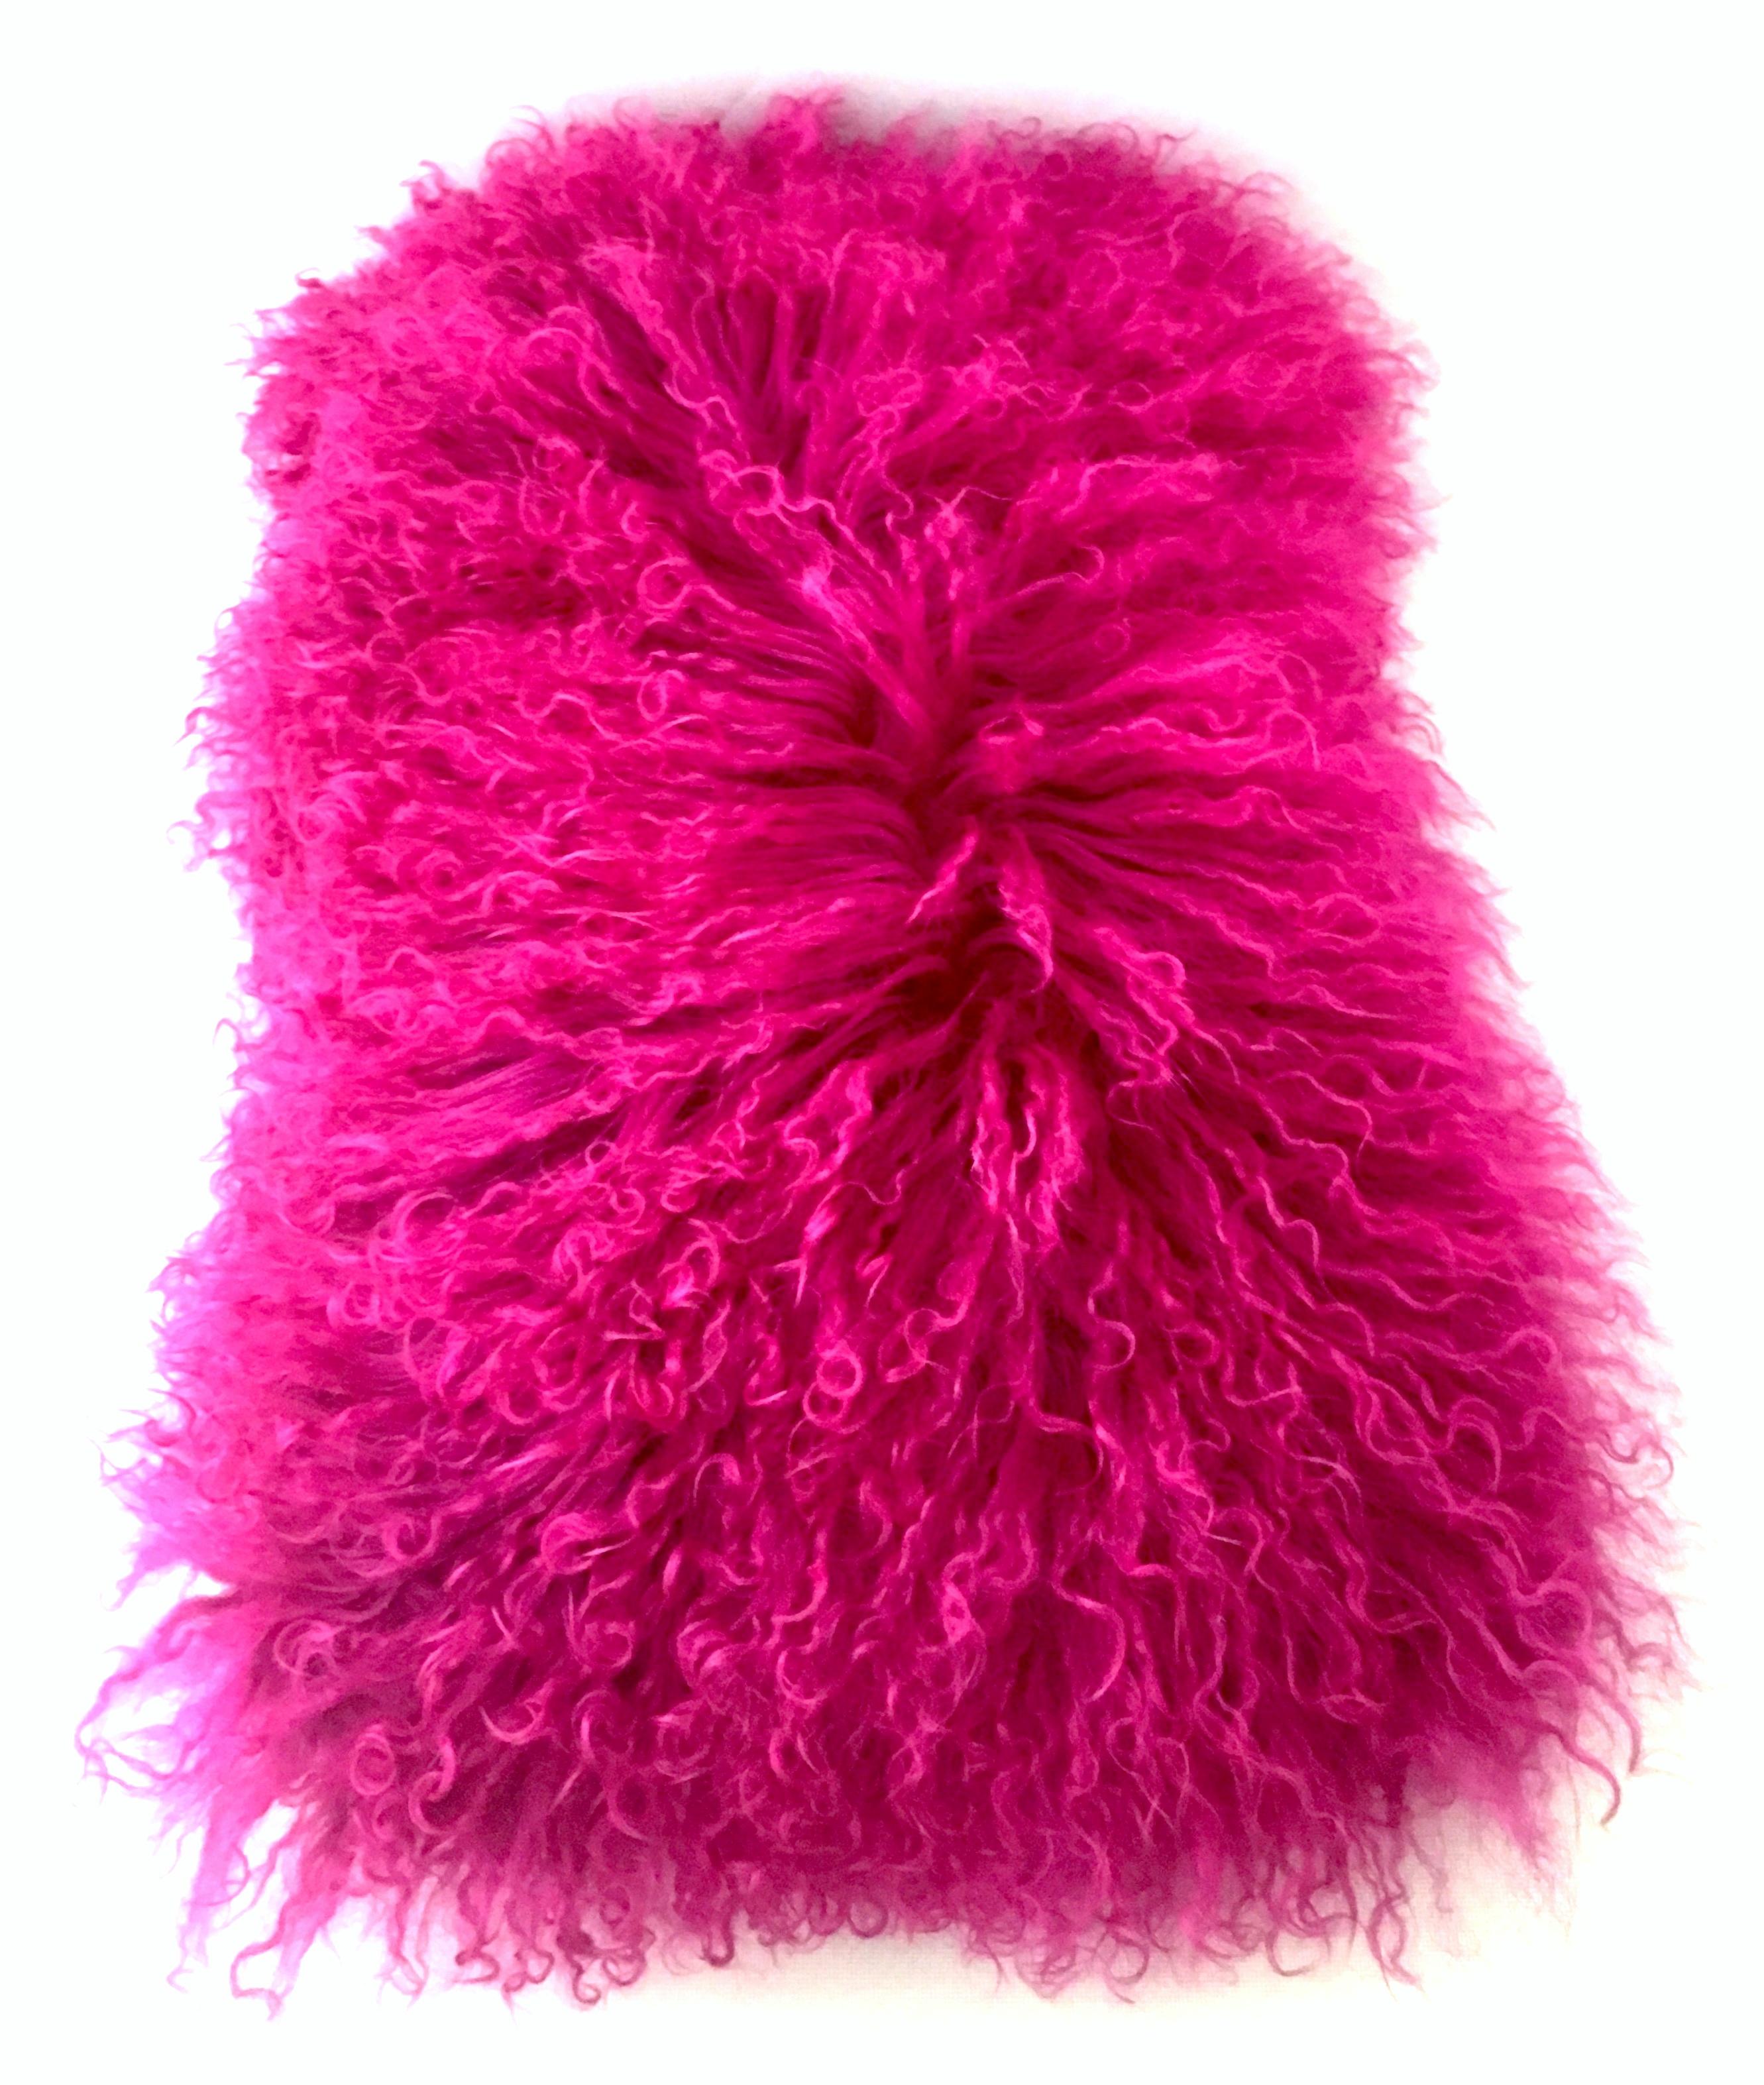 21st century Fuchsia New Zealand wool curly long hair Fuchsia lumbar pillow by, Auskin. Includes a cotton blend pillow insert with invisible zipper for easy removal. The back is finished in a micro blend fabric.
New or like new. Used for retail